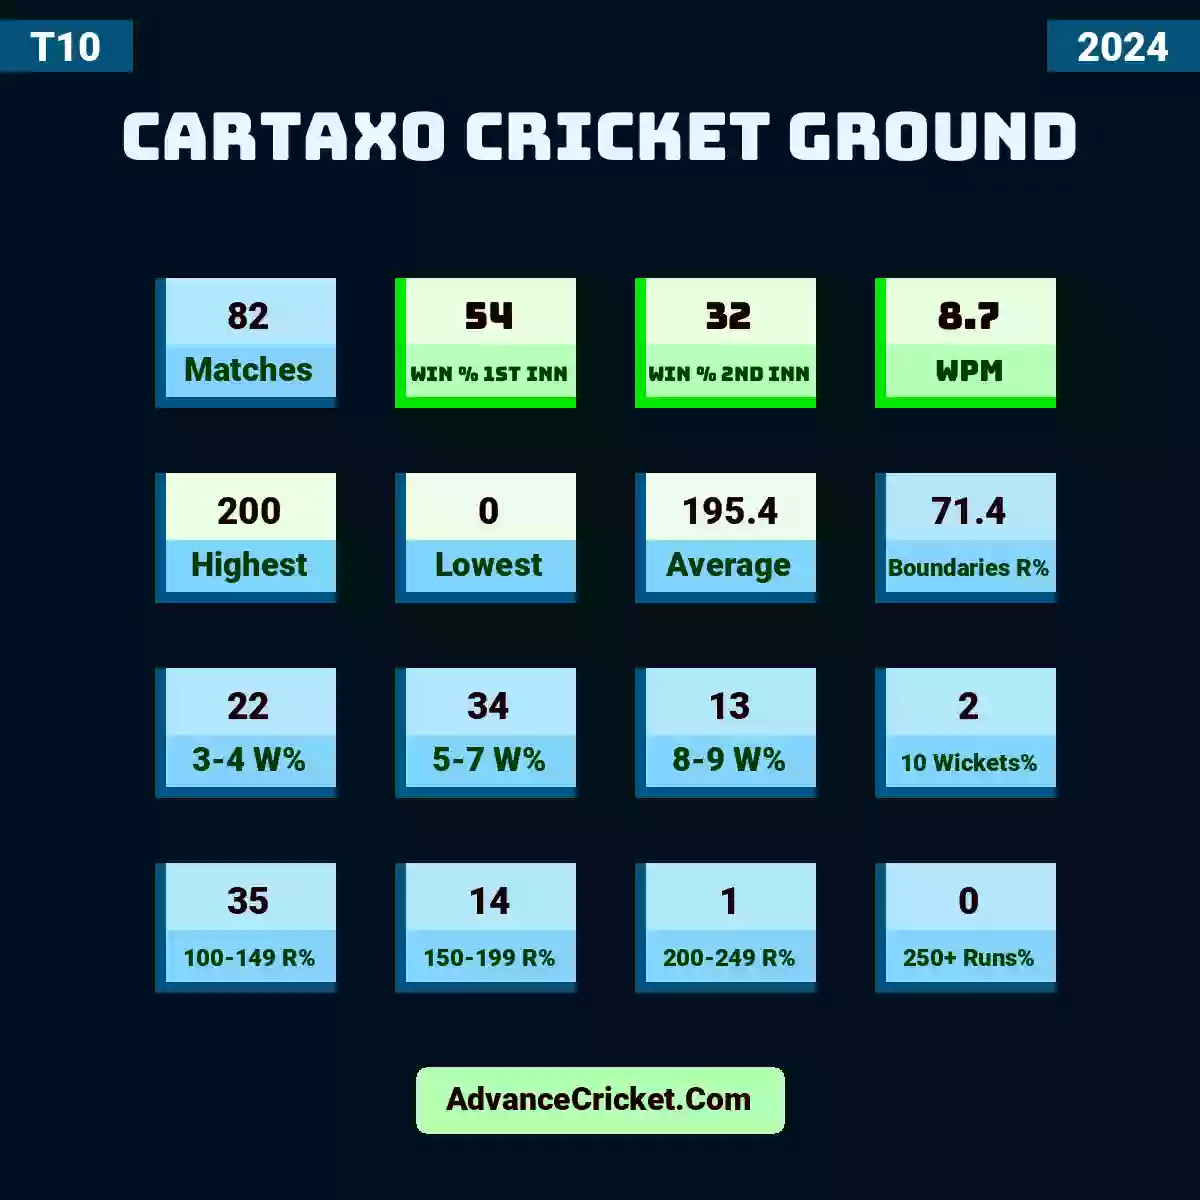 Image showing Cartaxo Cricket Ground T10 2024 with Matches: 82, Win % 1st Inn: 54, Win % 2nd Inn: 32, WPM: 8.7, Highest: 200, Lowest: 0, Average: 195.4, Boundaries R%: 71.4, 3-4 W%: 22, 5-7 W%: 34, 8-9 W%: 13, 10 Wickets%: 2, 100-149 R%: 35, 150-199 R%: 14, 200-249 R%: 1, 250+ Runs%: 0.